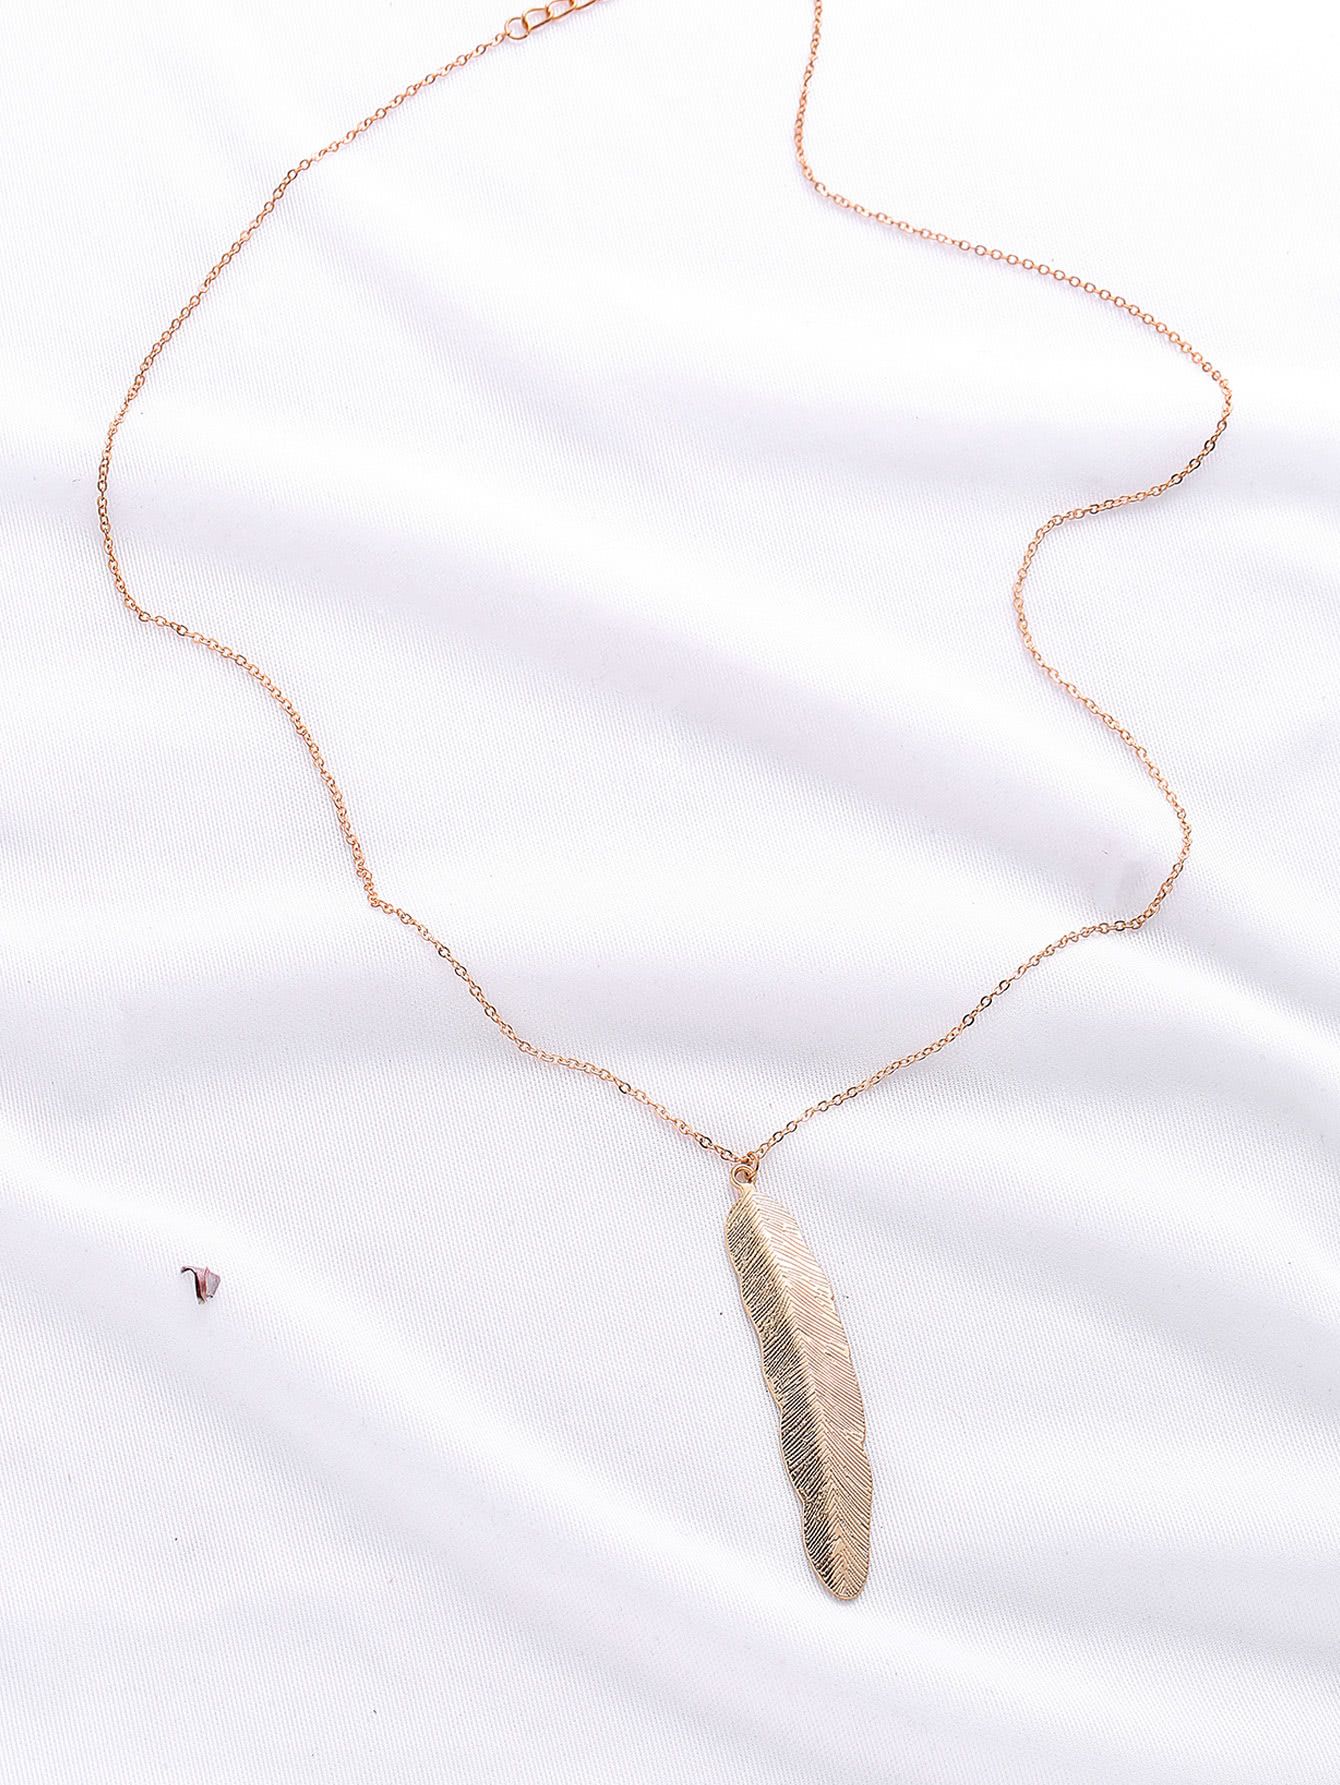 Gold Feather Pendant Chain Necklace | MakeMeChic.com